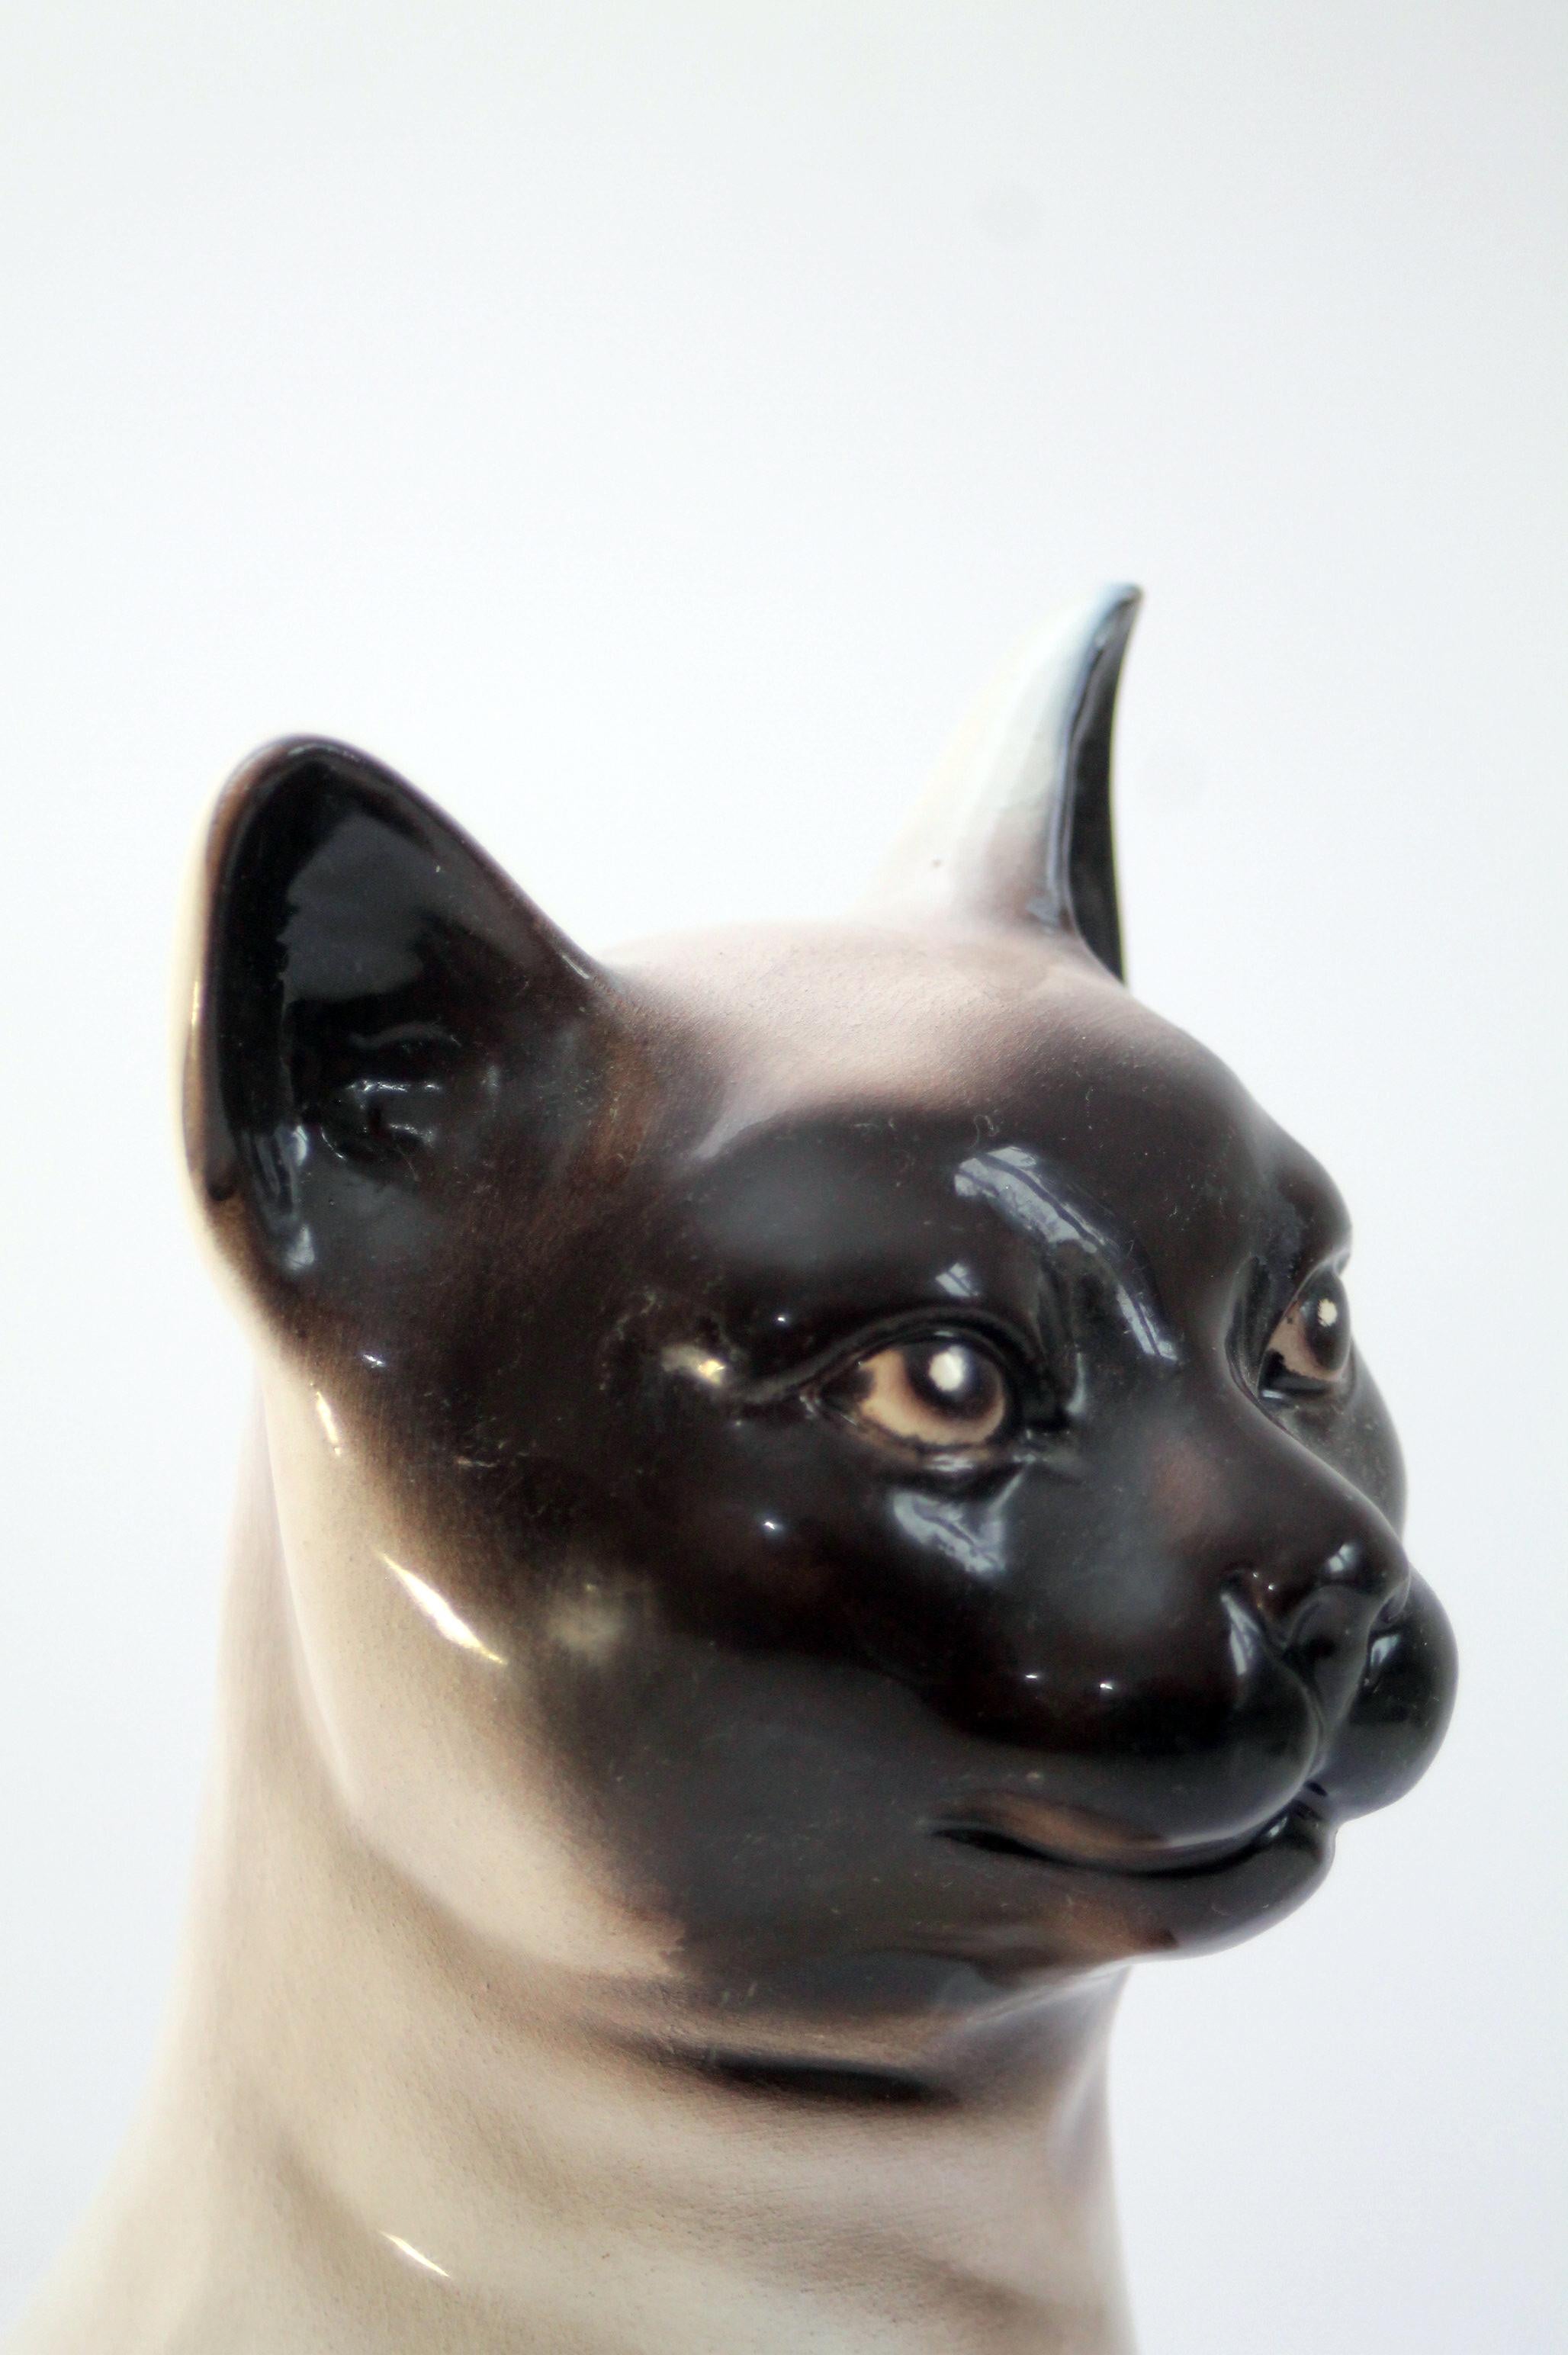 Hand made 1960's original modernist mid-century modern ceramic Siamese cat

Technique: colored glazed ceramics (barboutine)
Design period: early 1960's
Origin: Italy
Condition: Immaculate with no cracks, chips, or any visible flaw.

Dimensions: 